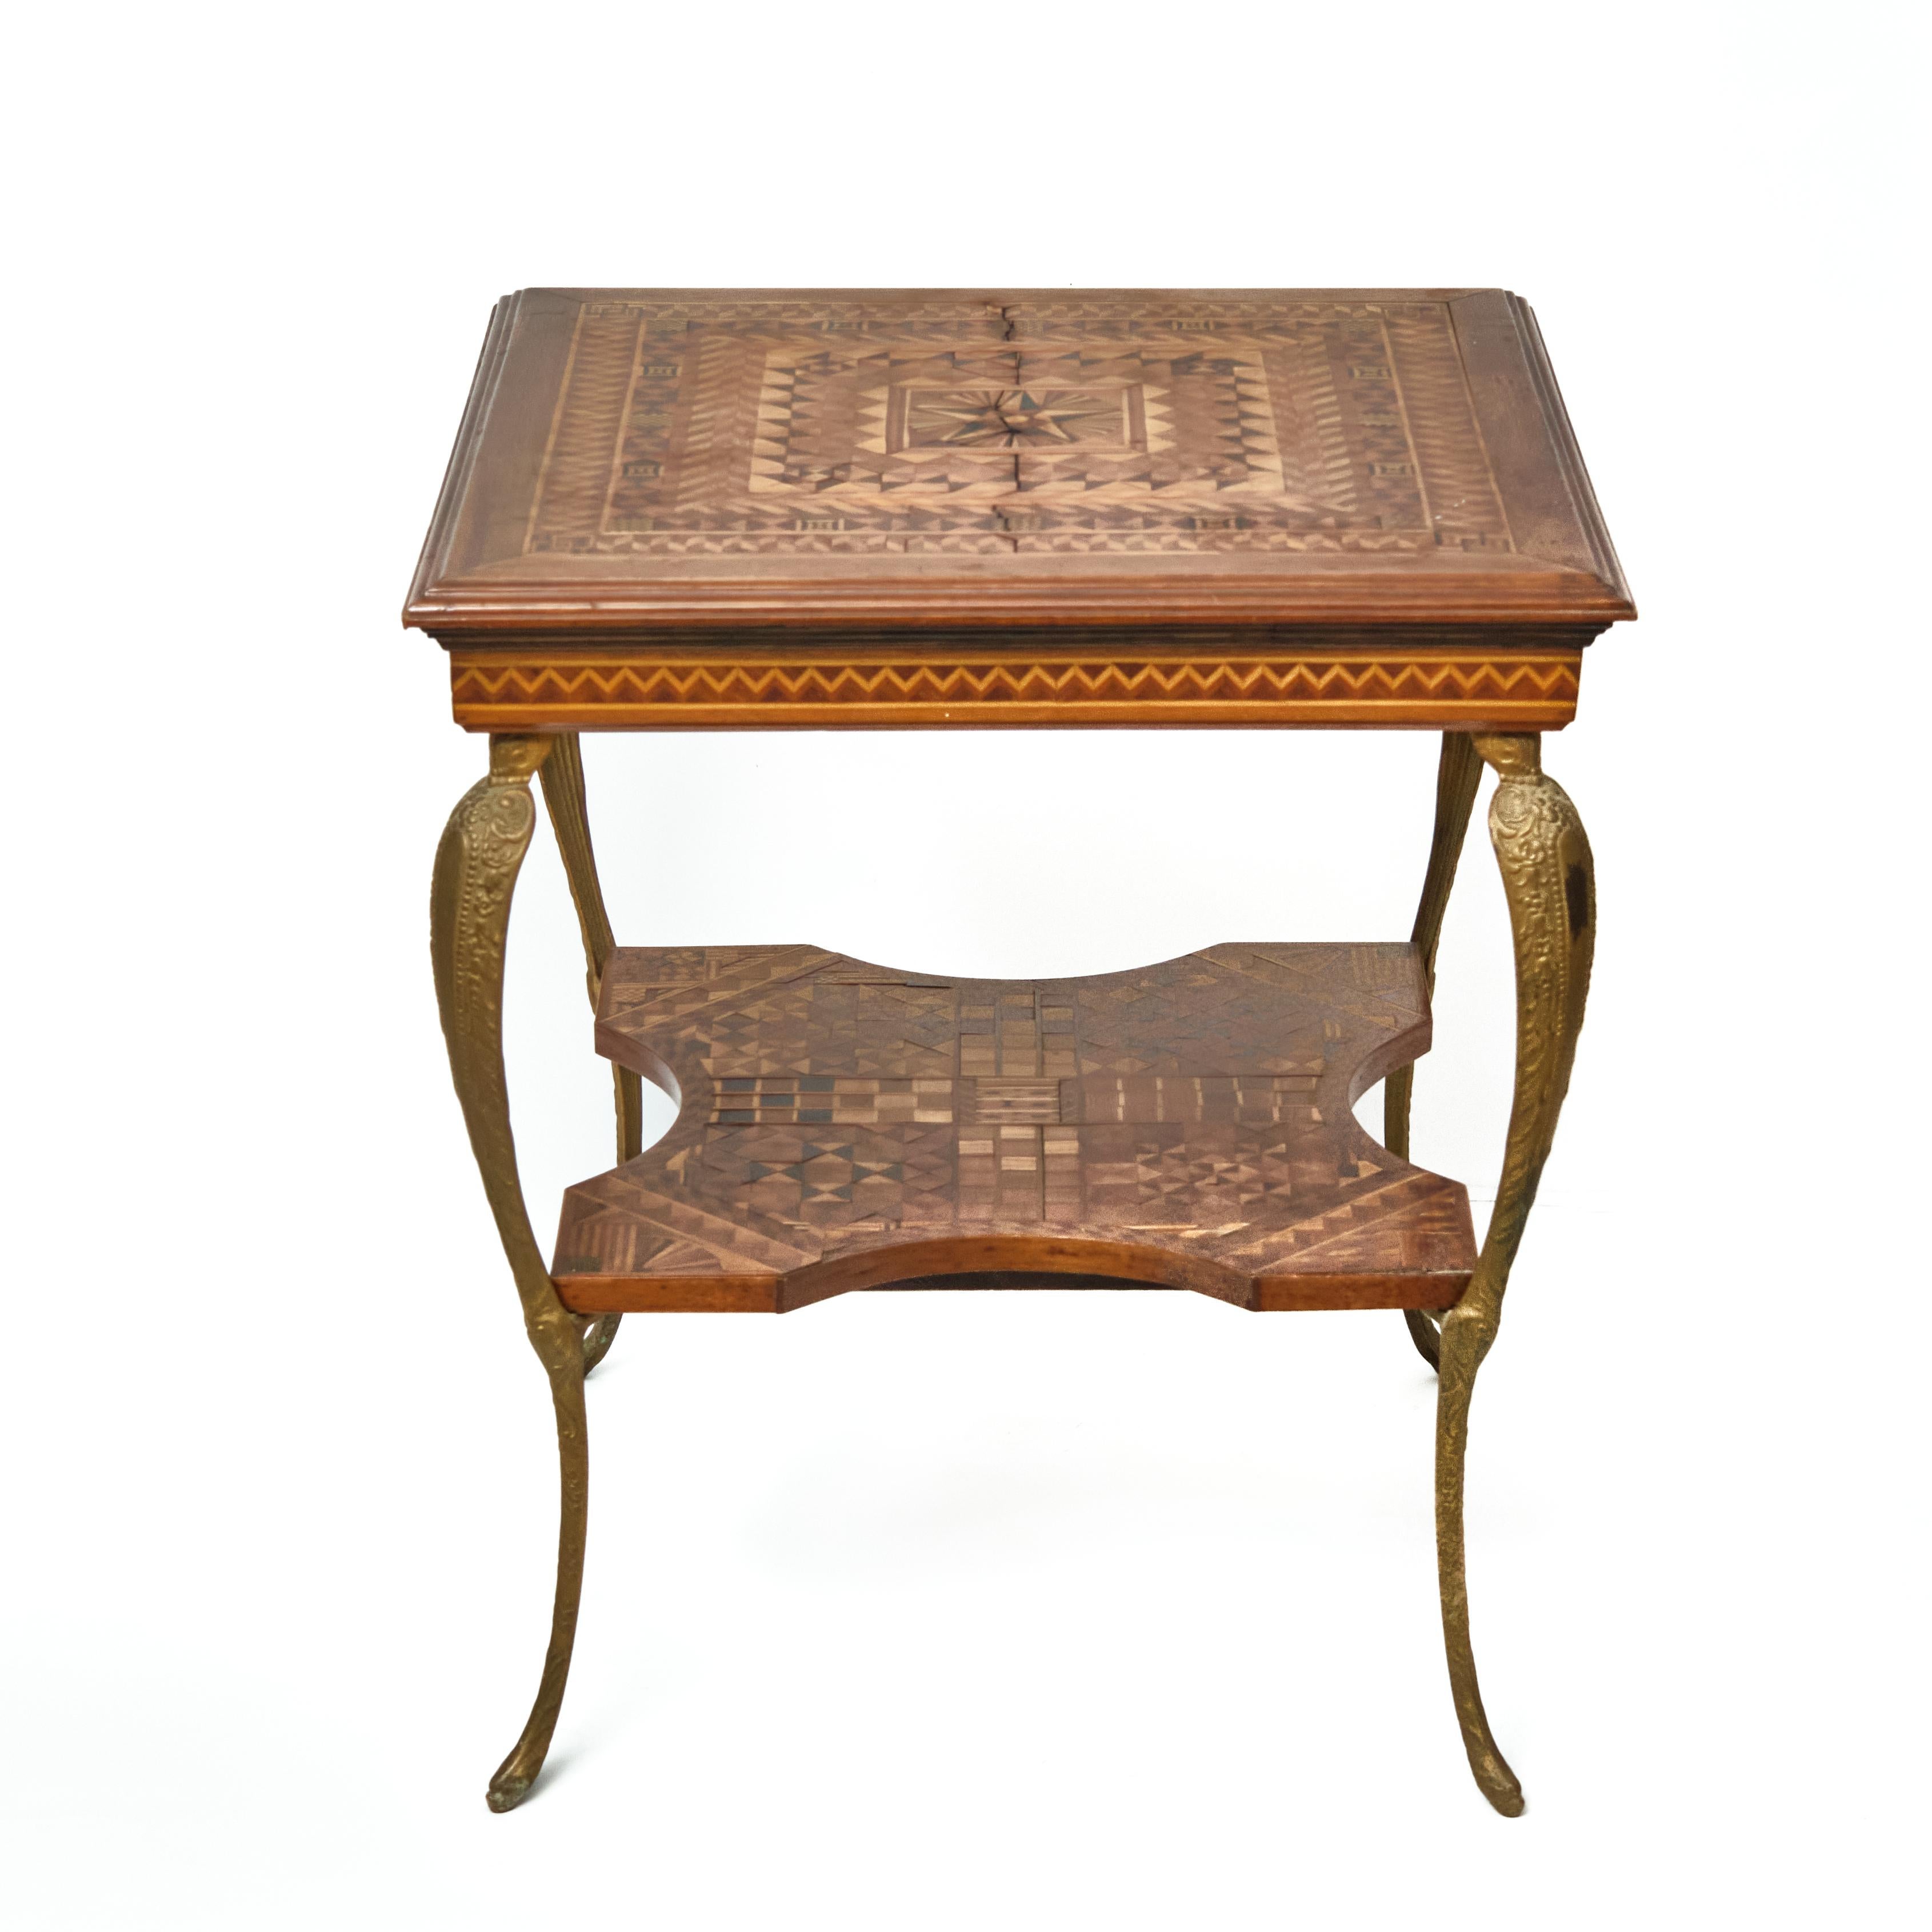 Late 19th century marquetry inlaid parlor, or side table. The square top with molded edges raised on cast brass cabriole legs having a square medial shelf with concave cutouts. Extensive marquetry inlay of geometric designs on both top and